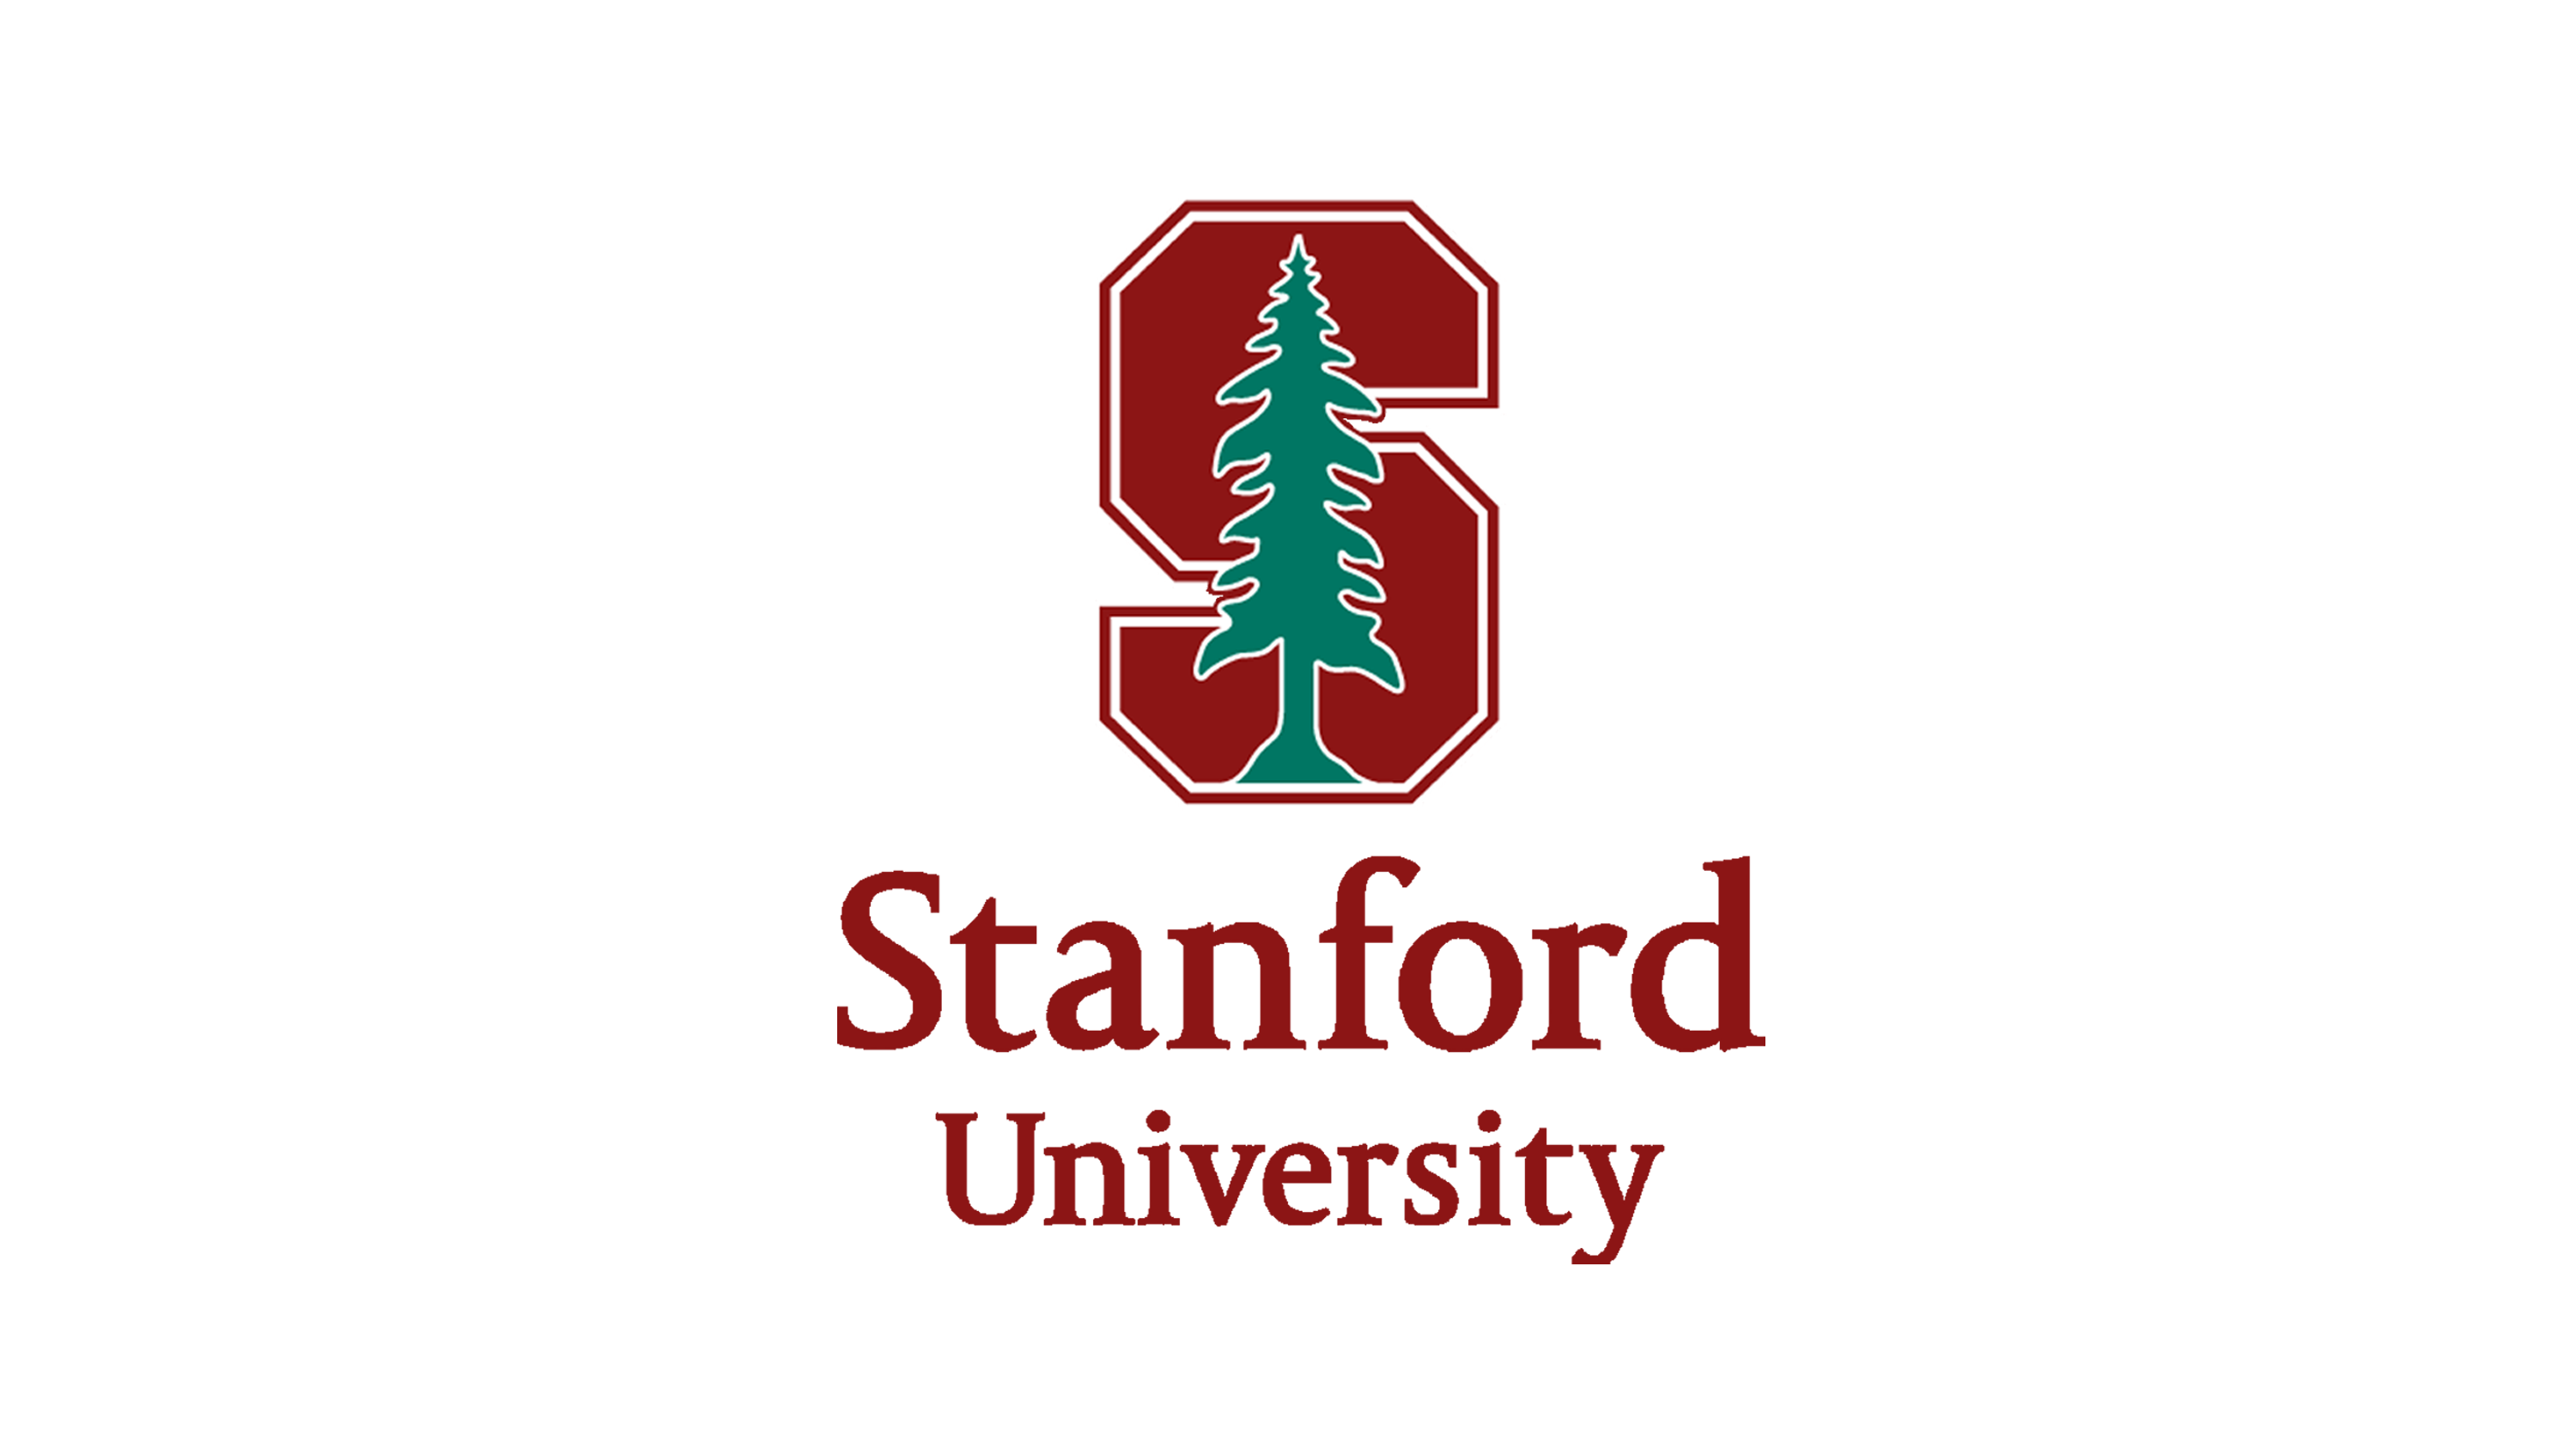 To the page:Sophie Fleischmann at Stanford University